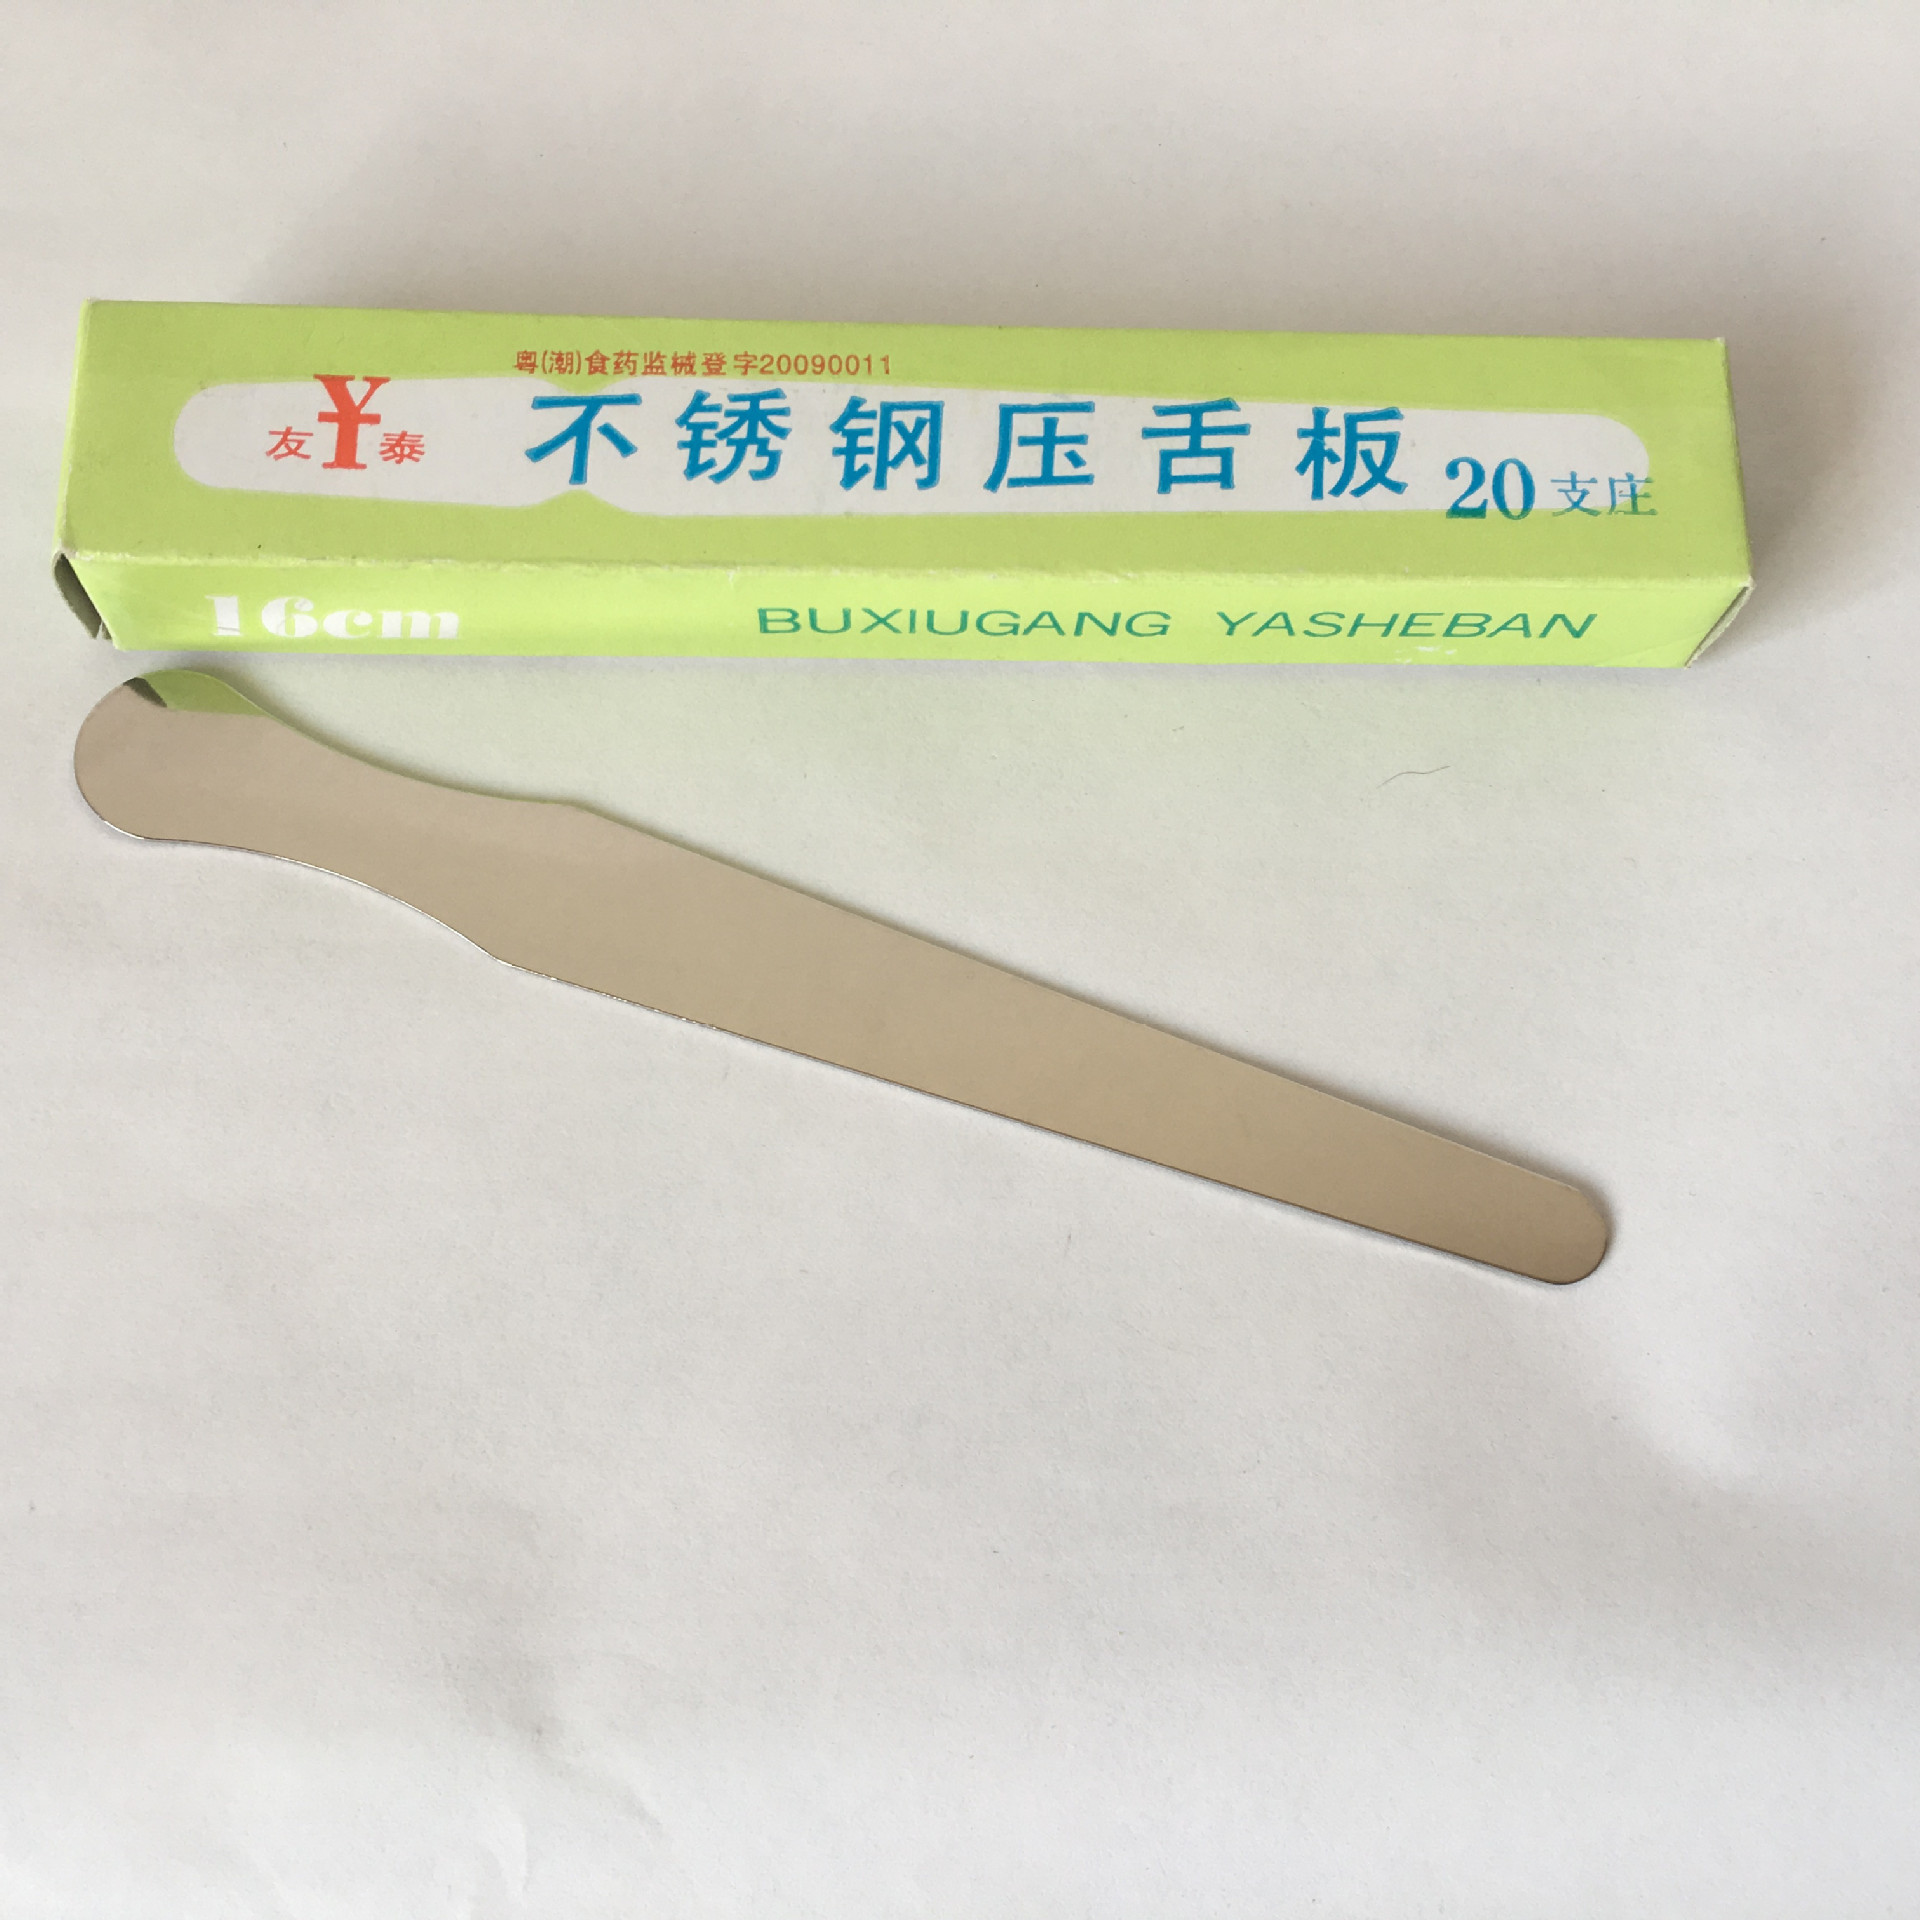 Stainless steel Spatula stir oral cavity Supplies oral cavity inspect